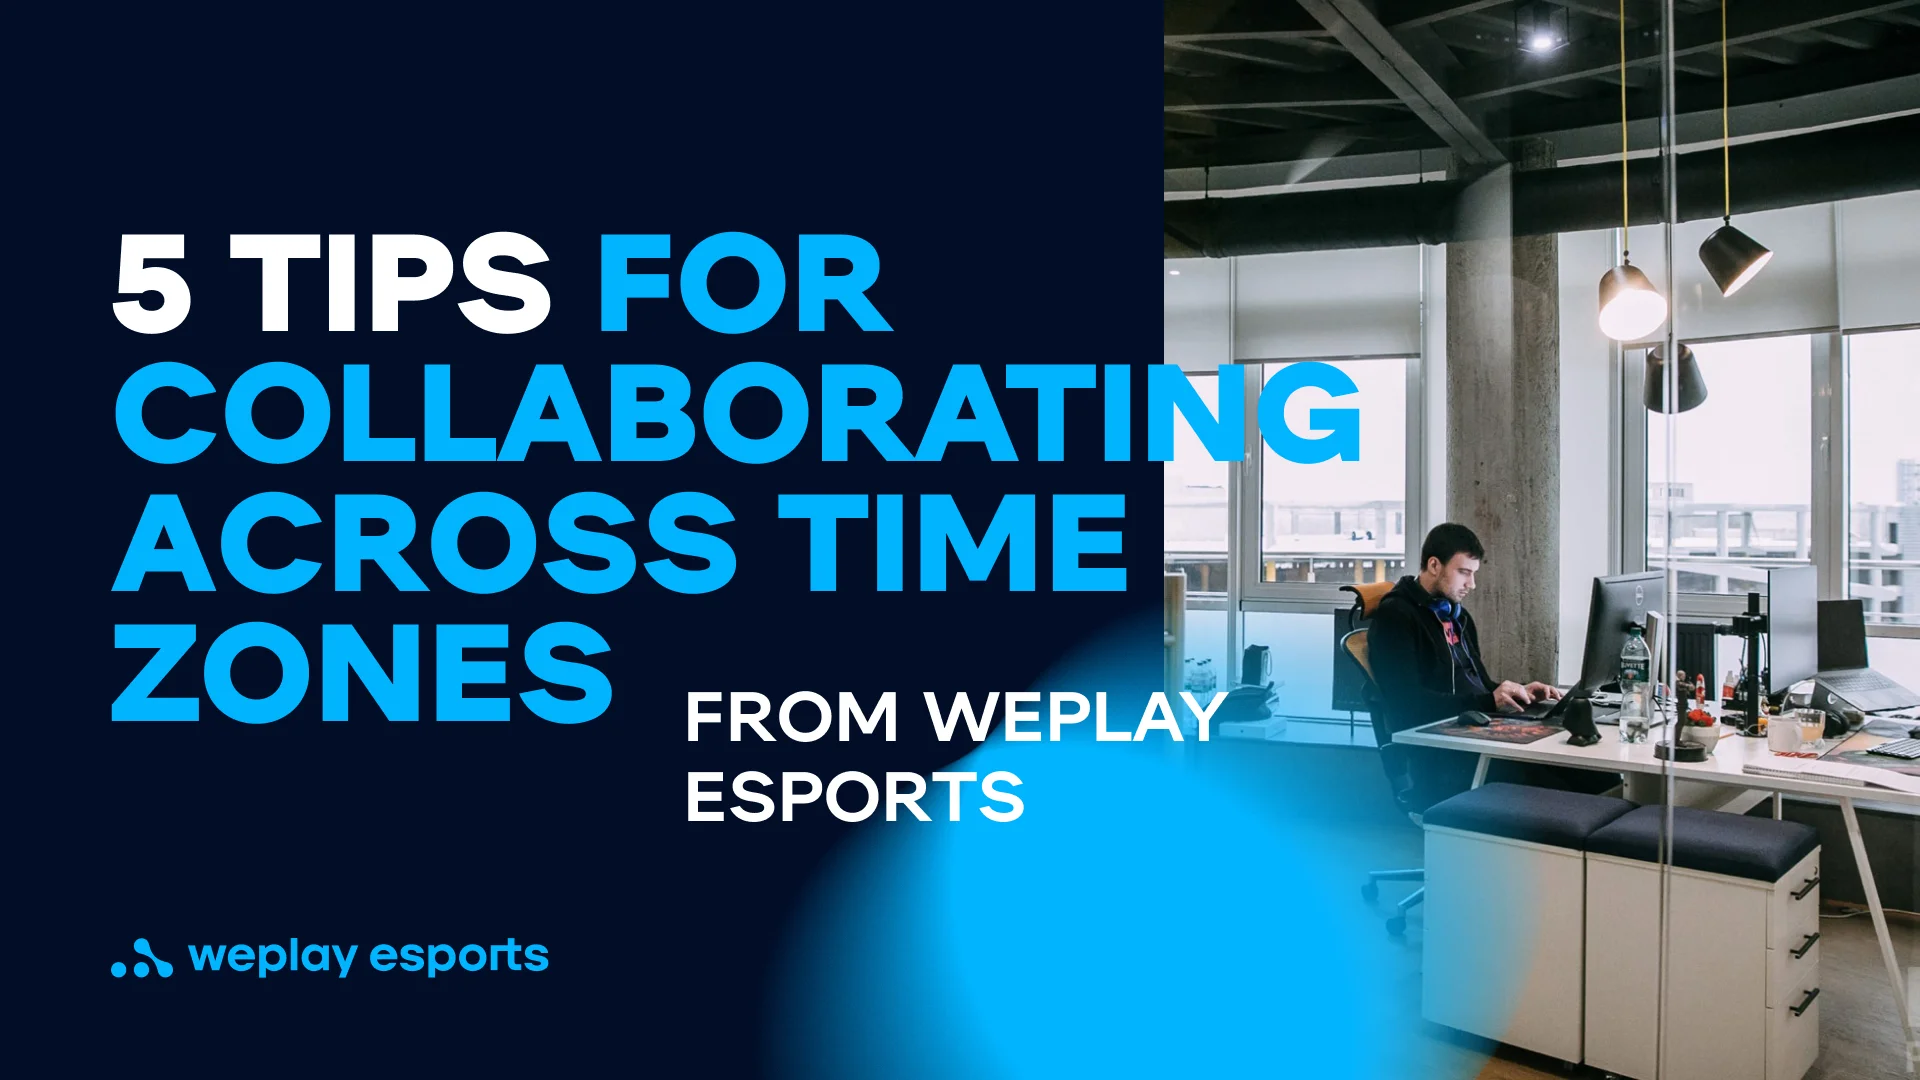 5 tips for collaborating across time zones from WePlay Esports. Credit: WePlay Holding